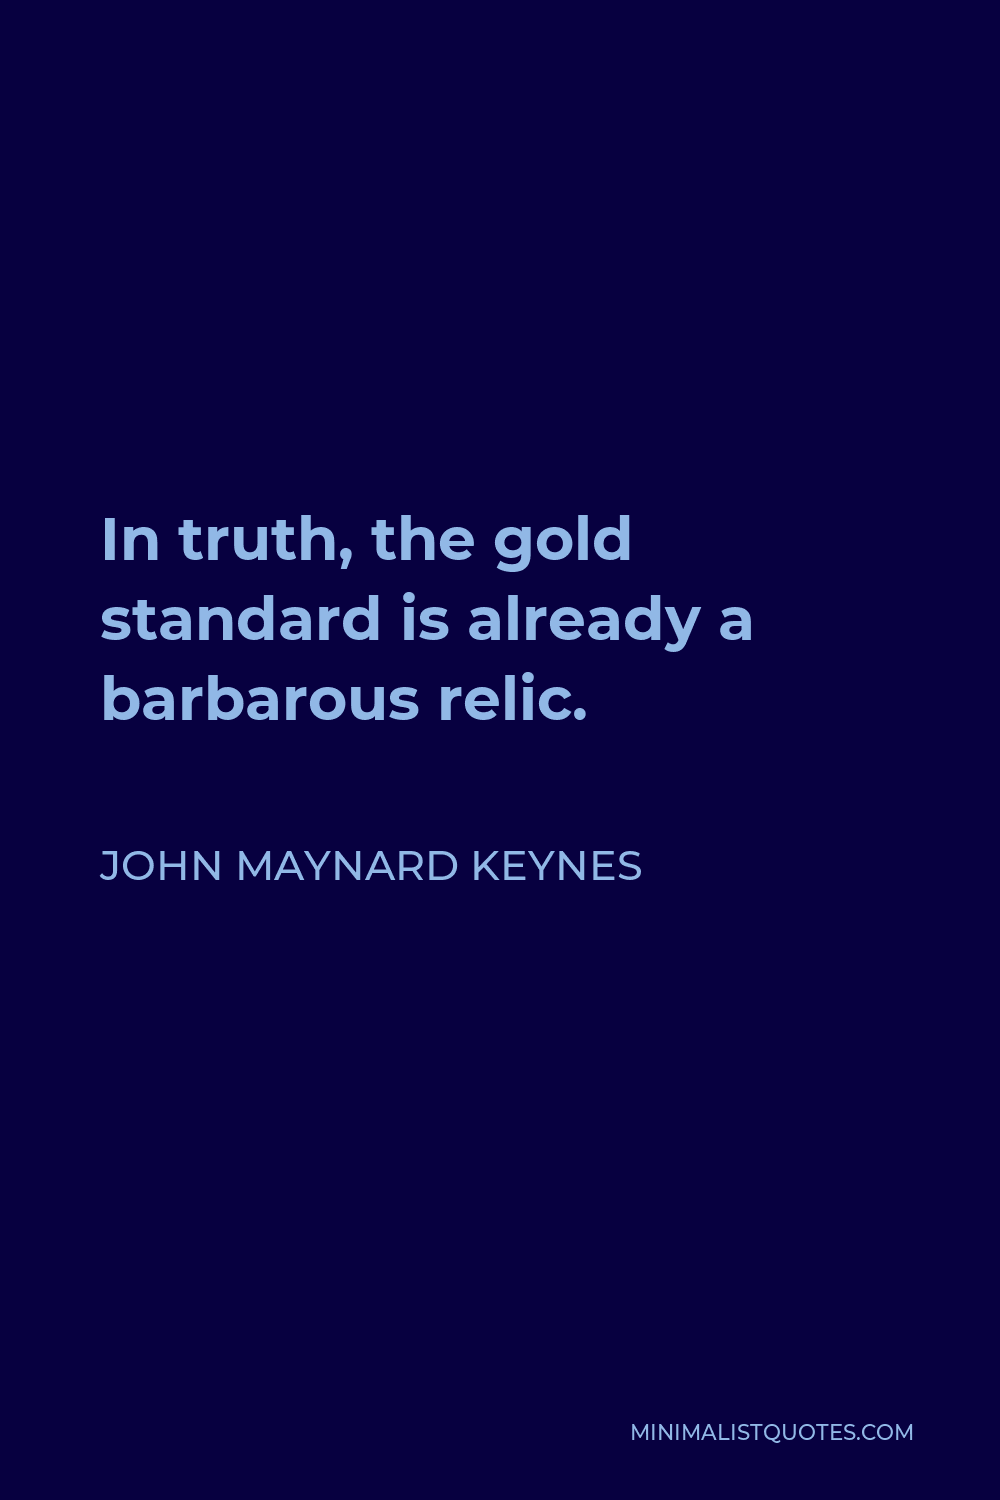 John Maynard Keynes Quote - In truth, the gold standard is already a barbarous relic.